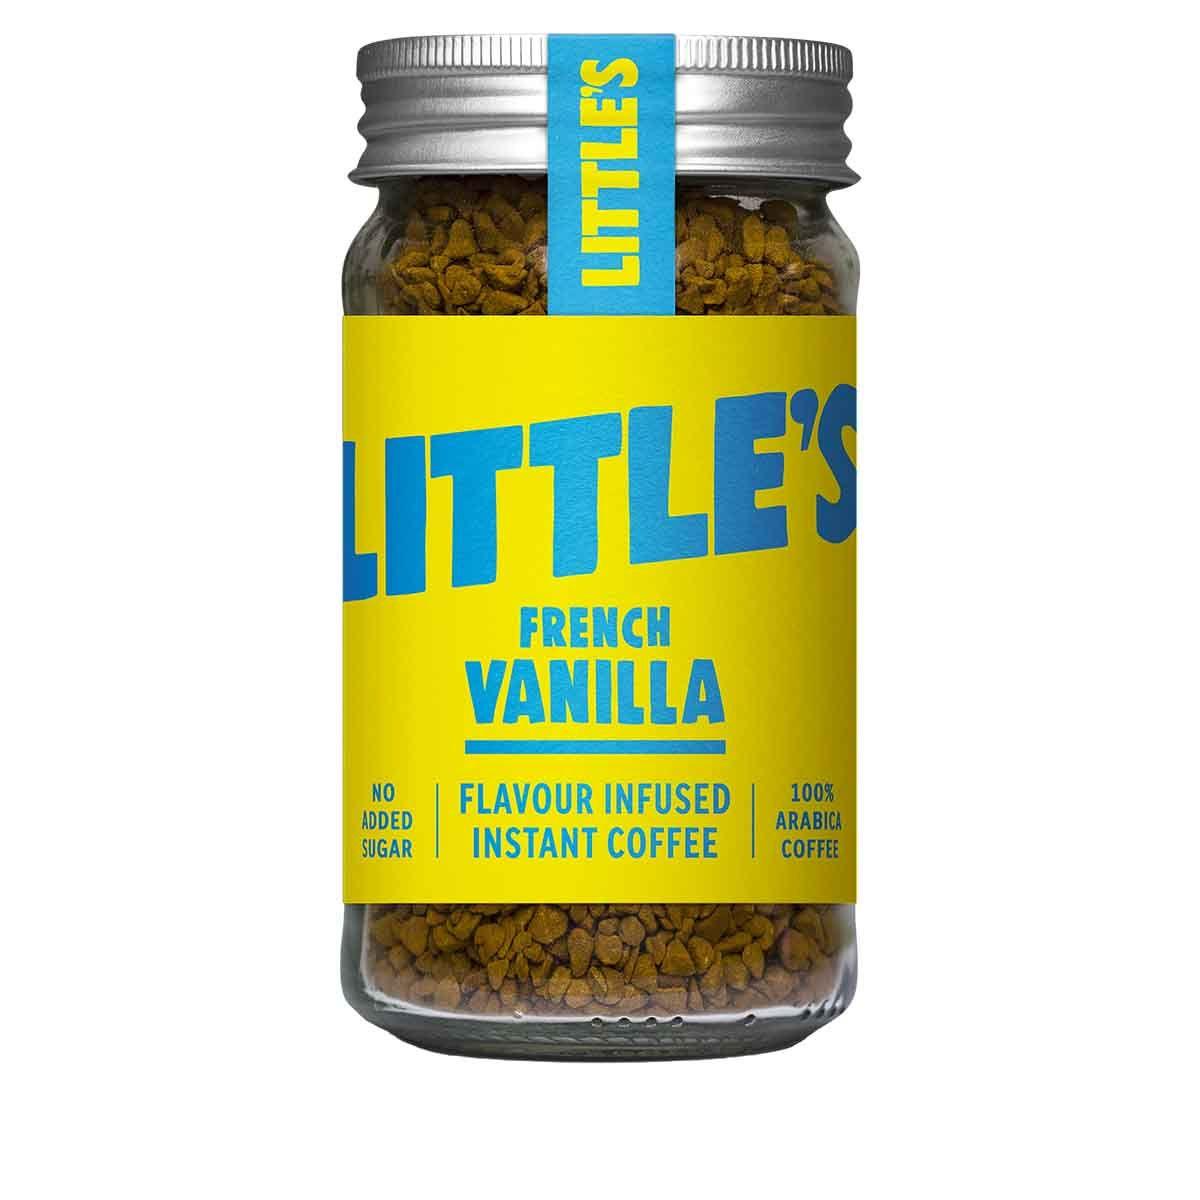 Littles - Flavoured Instant Coffee French Vanilla - 50g - Vending Superstore